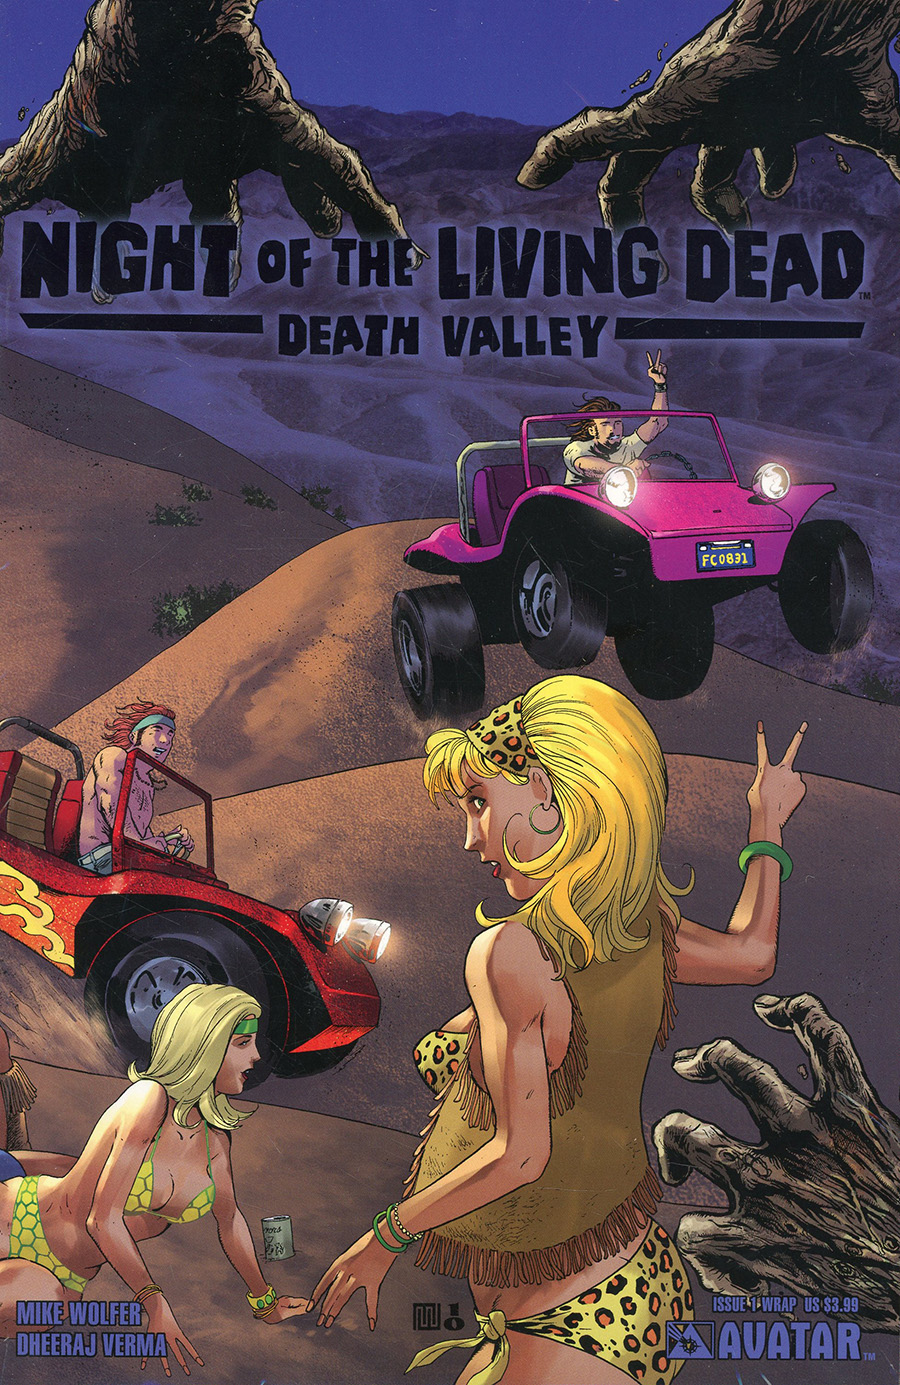 Night Of The Living Dead Death Valley 1-5 Wraparound Covers Bag Set (5-Count)